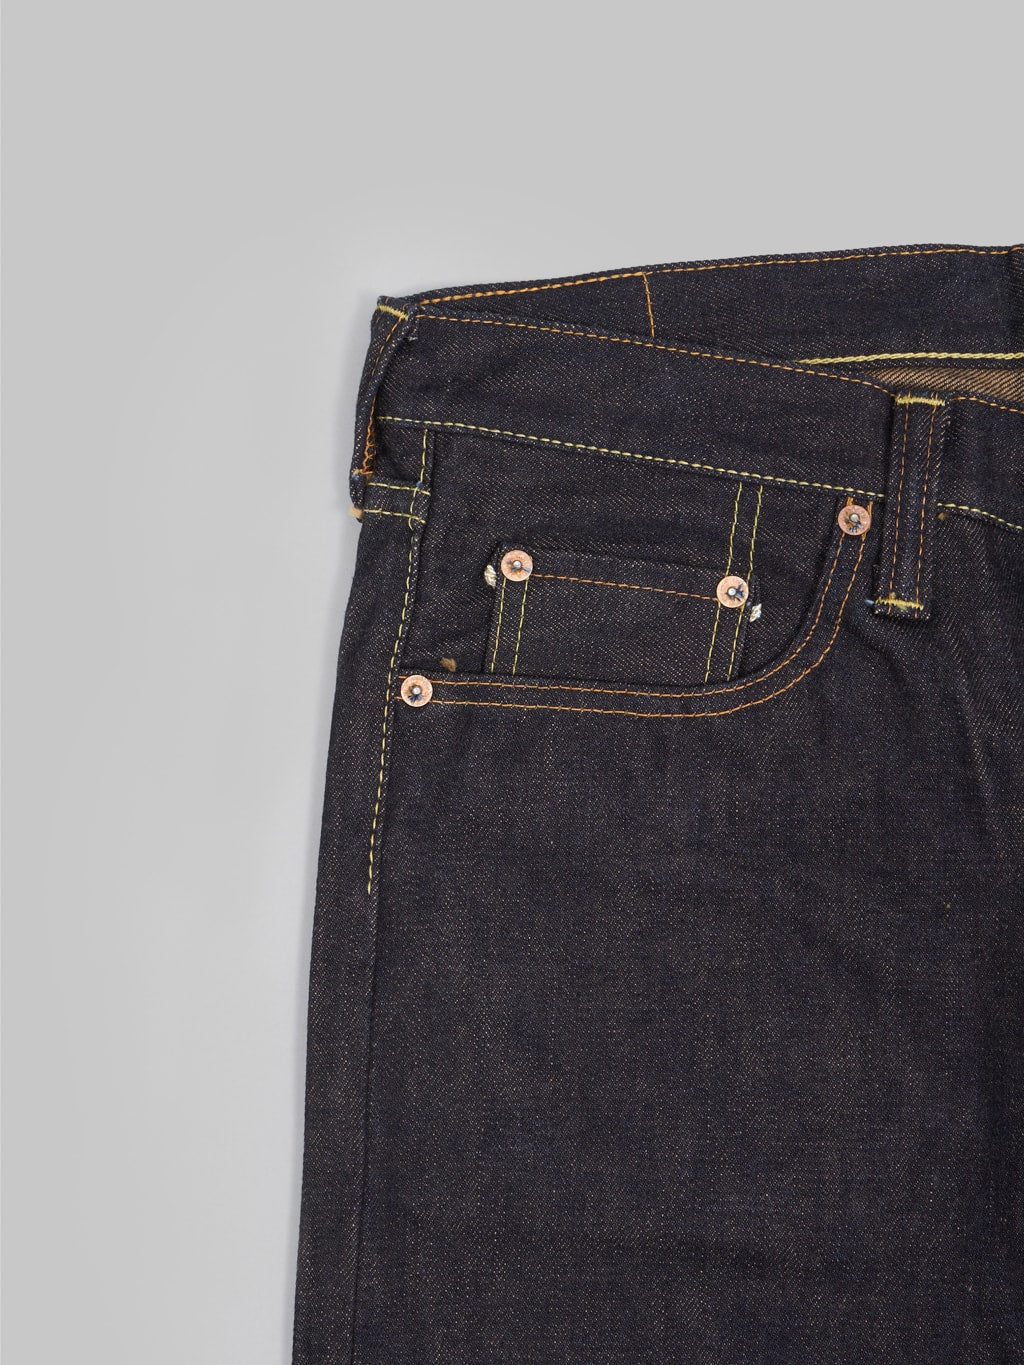 The Strike Gold 2103 Brown Weft Regular Straight Jeans